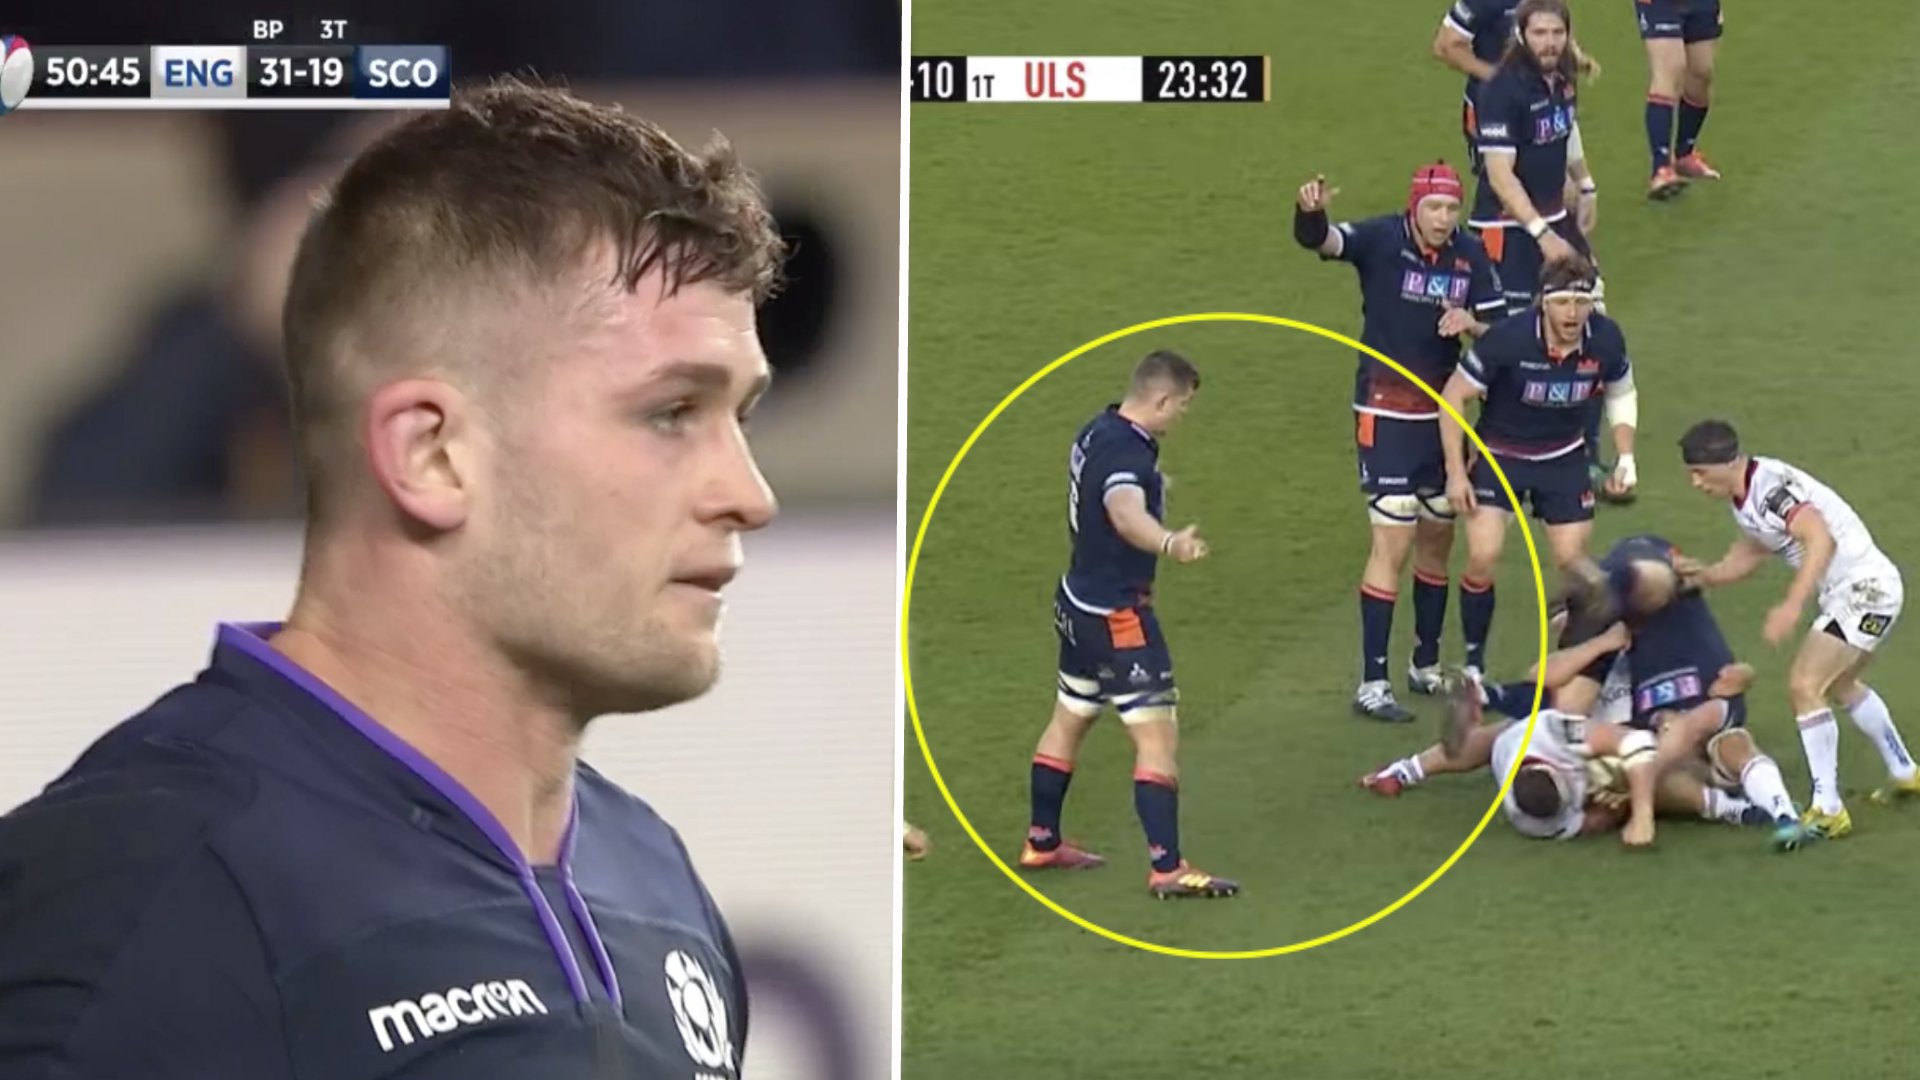 Scotland have found their very own Billy Vunipola in Magnus Bradbury - NUCLEAR COMPILATION